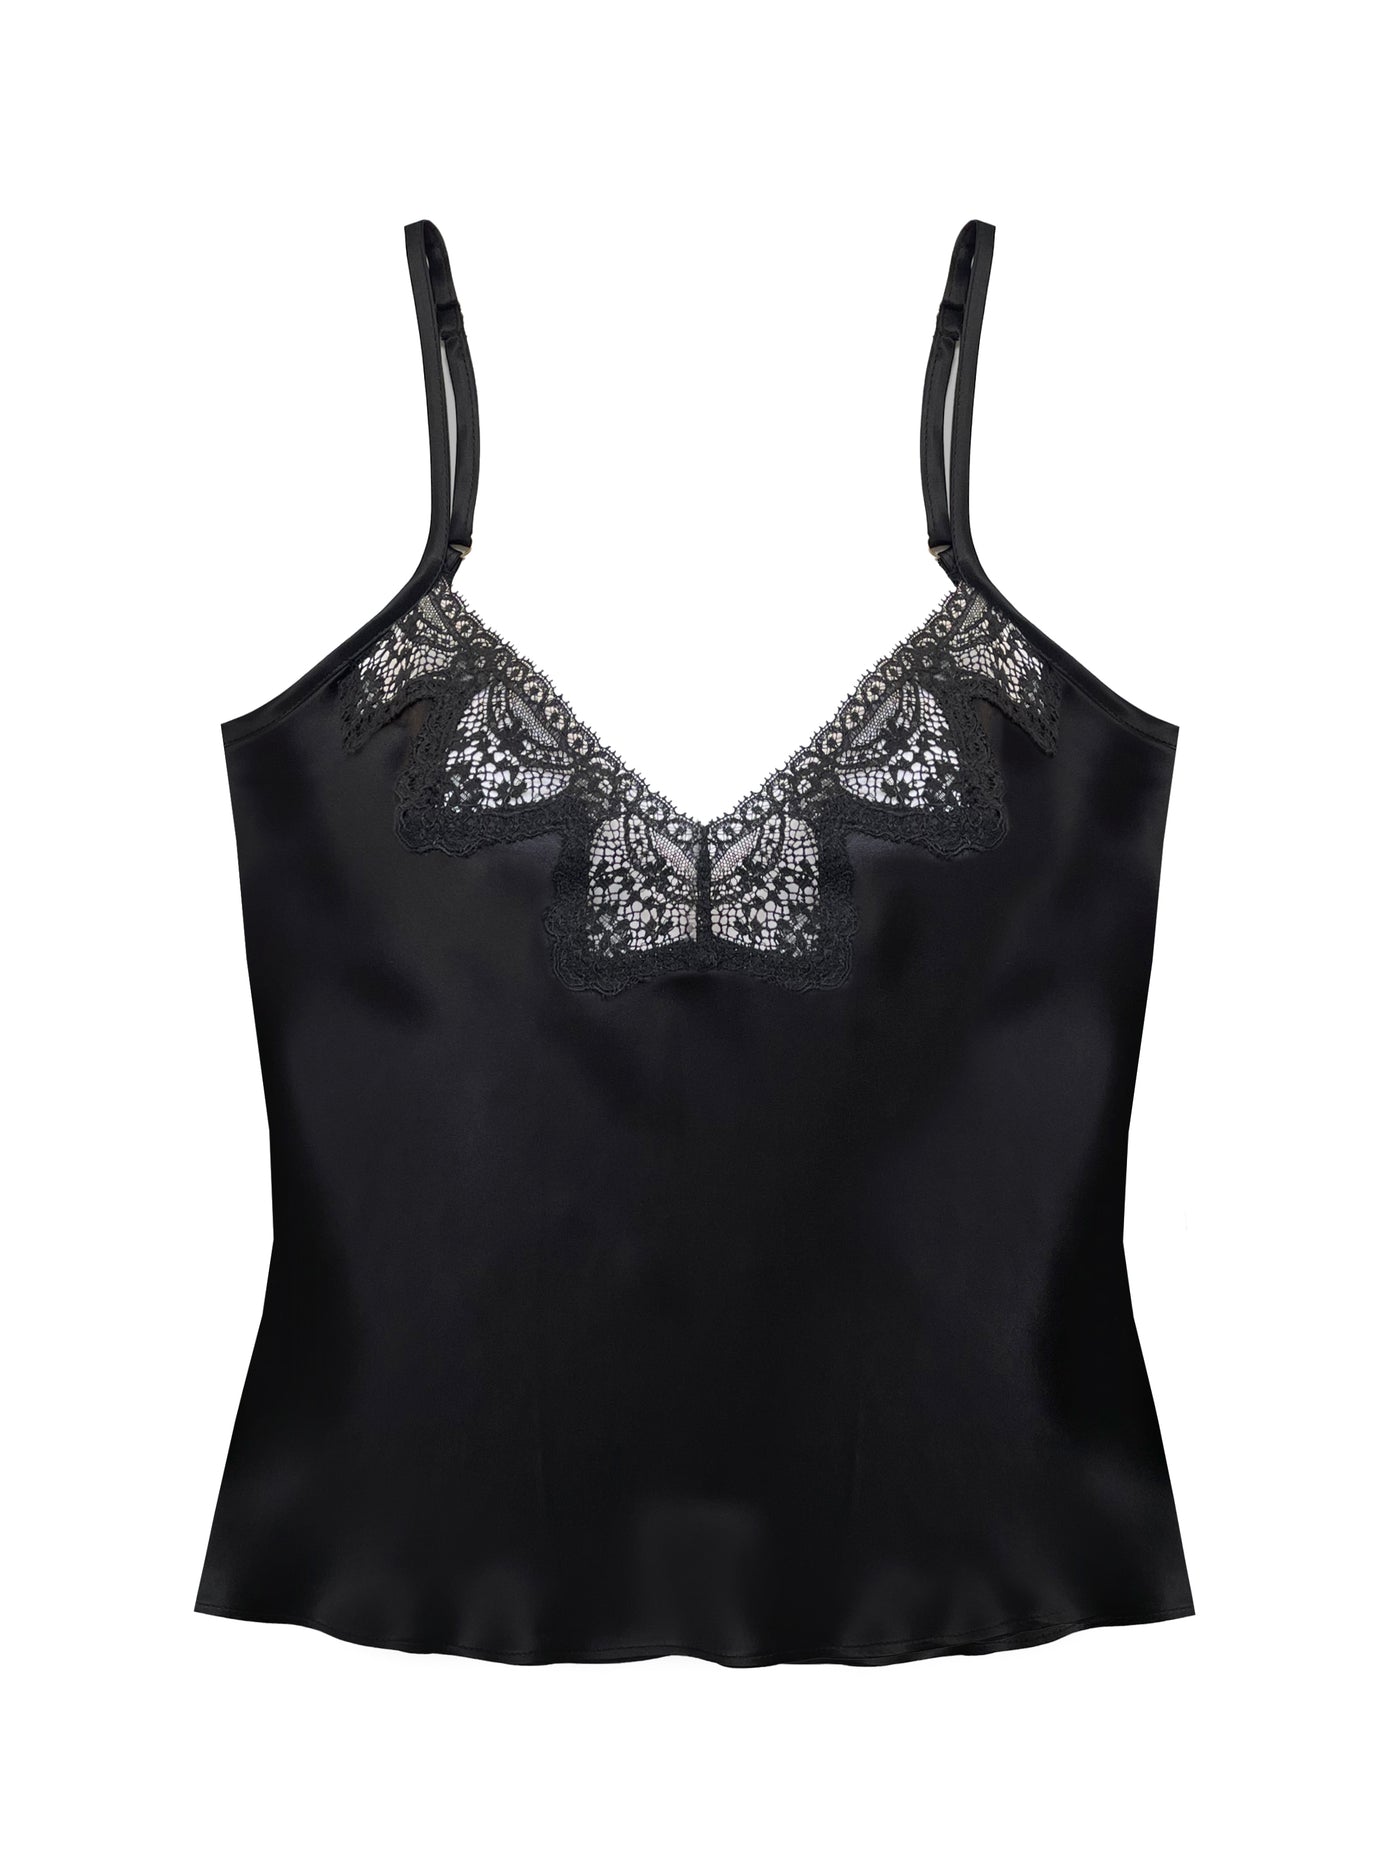 Zoe Black Silk and Lace Camisole by Ayten Gasson